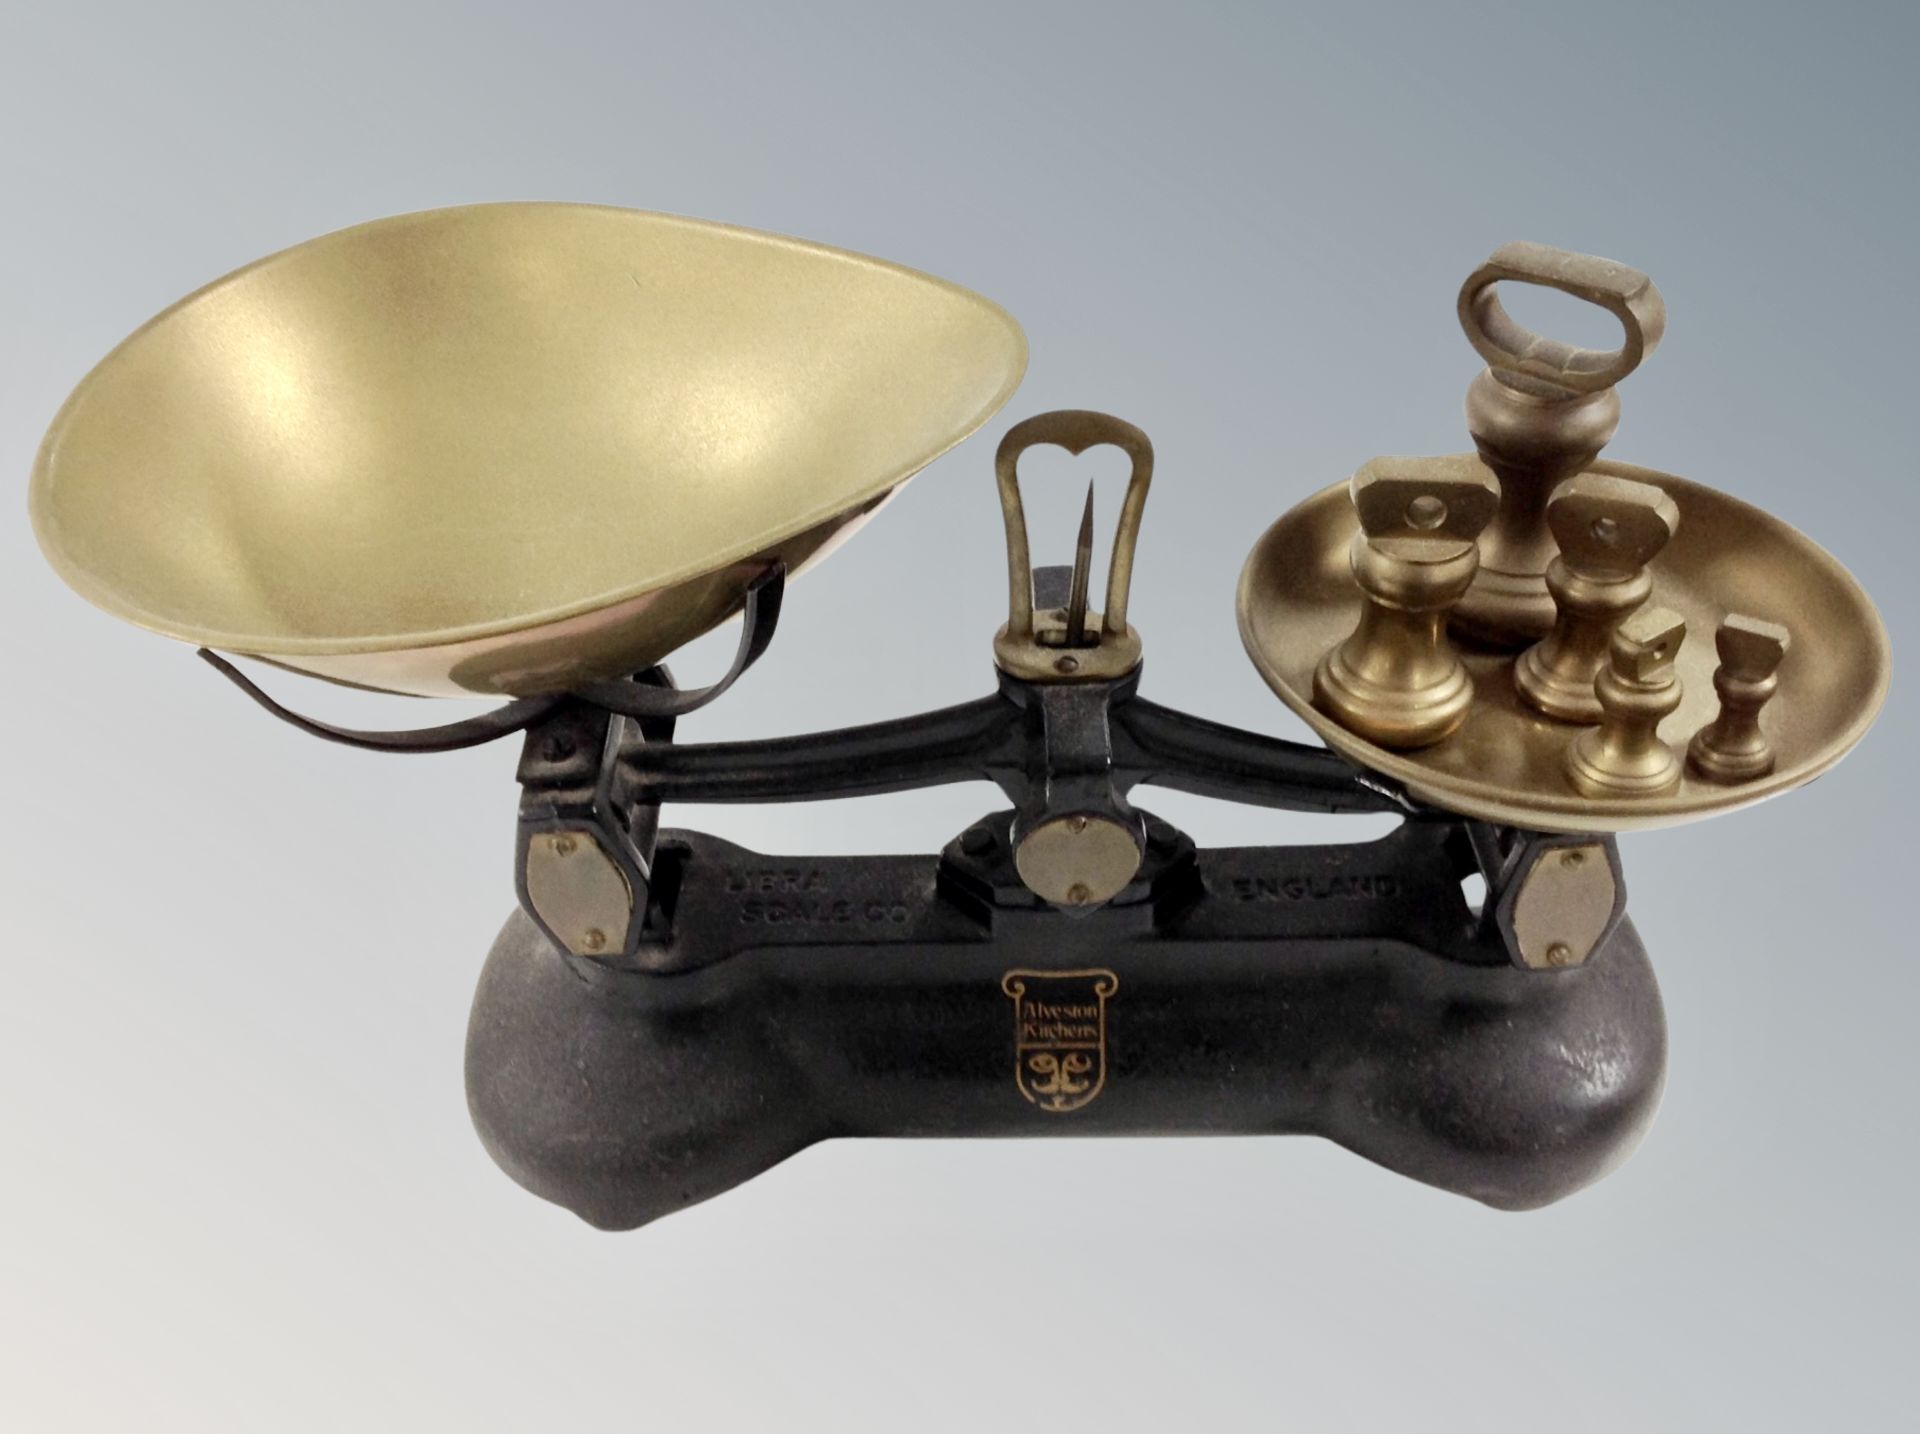 A set of Victorian cast iron and brass Alveston scales and a quantity of graduated weights